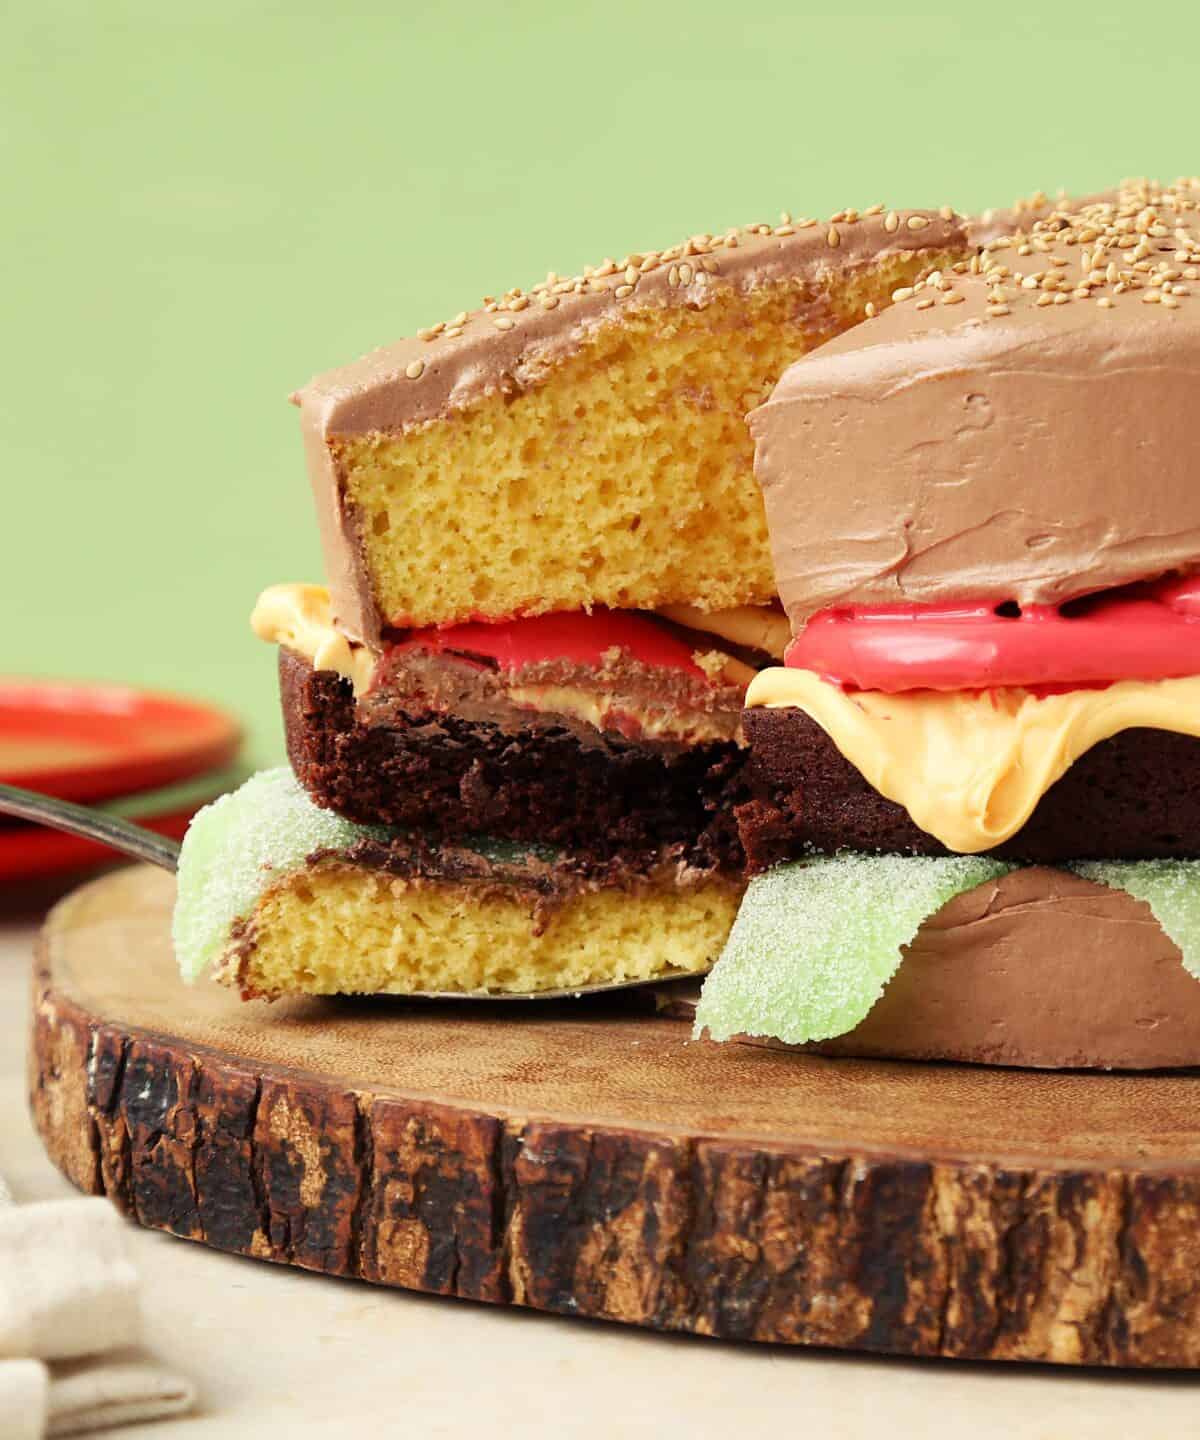  Celebrate April Fools' Day with our delicious burger-inspired cake.